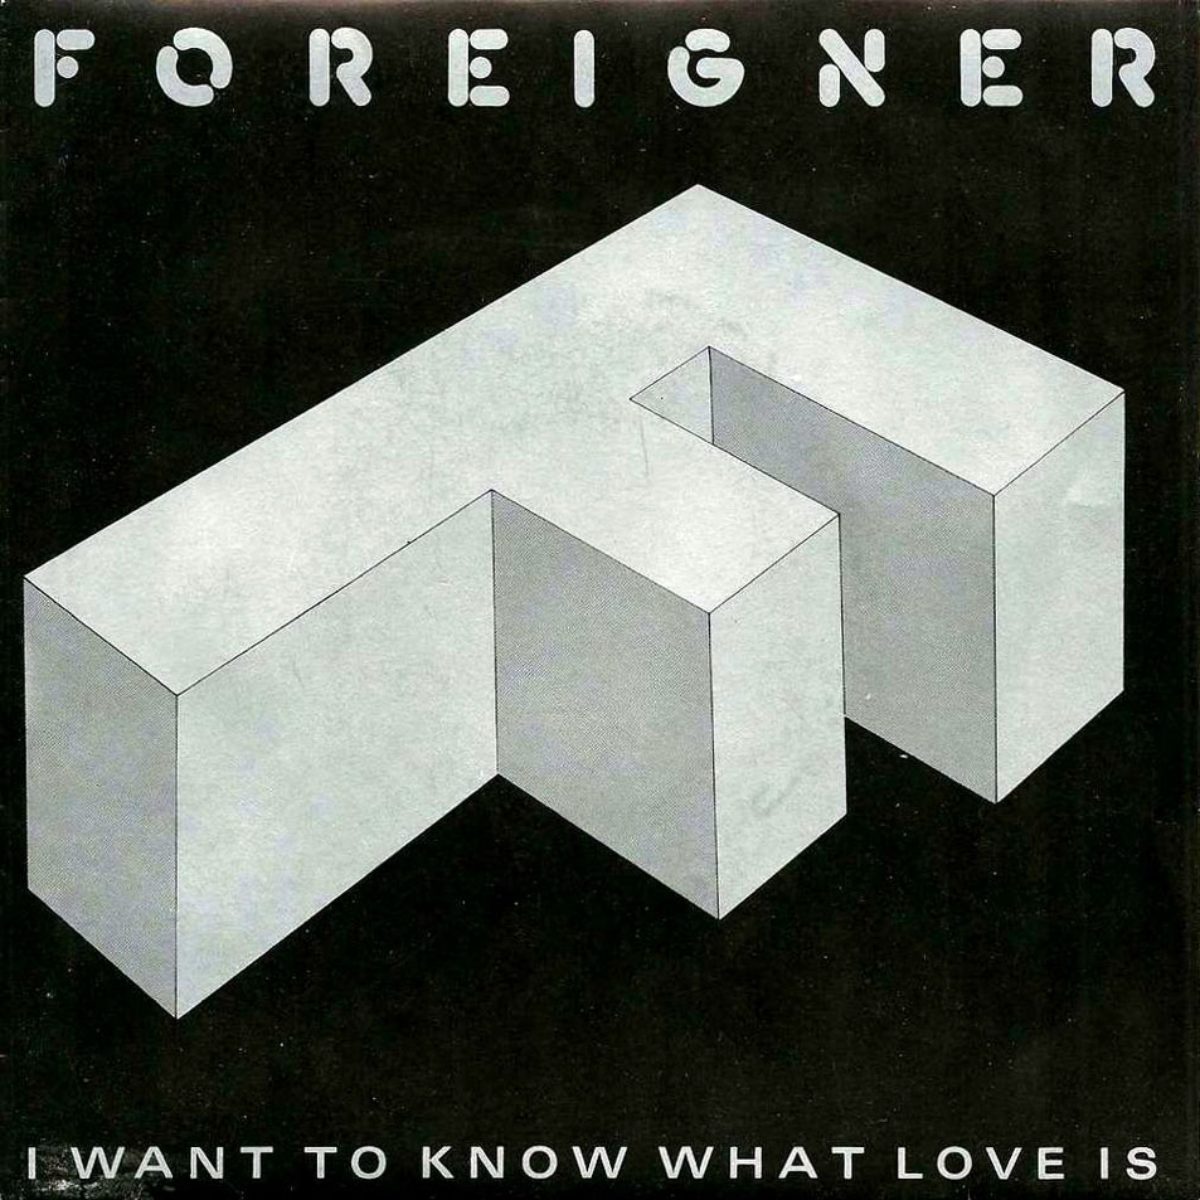 Every want to know. I want to know what Love is. Foreigner - i want to know what Love is. Foreigner i want to know what Love is (1999 Remaster). I want to know what Love is Foreigner год.